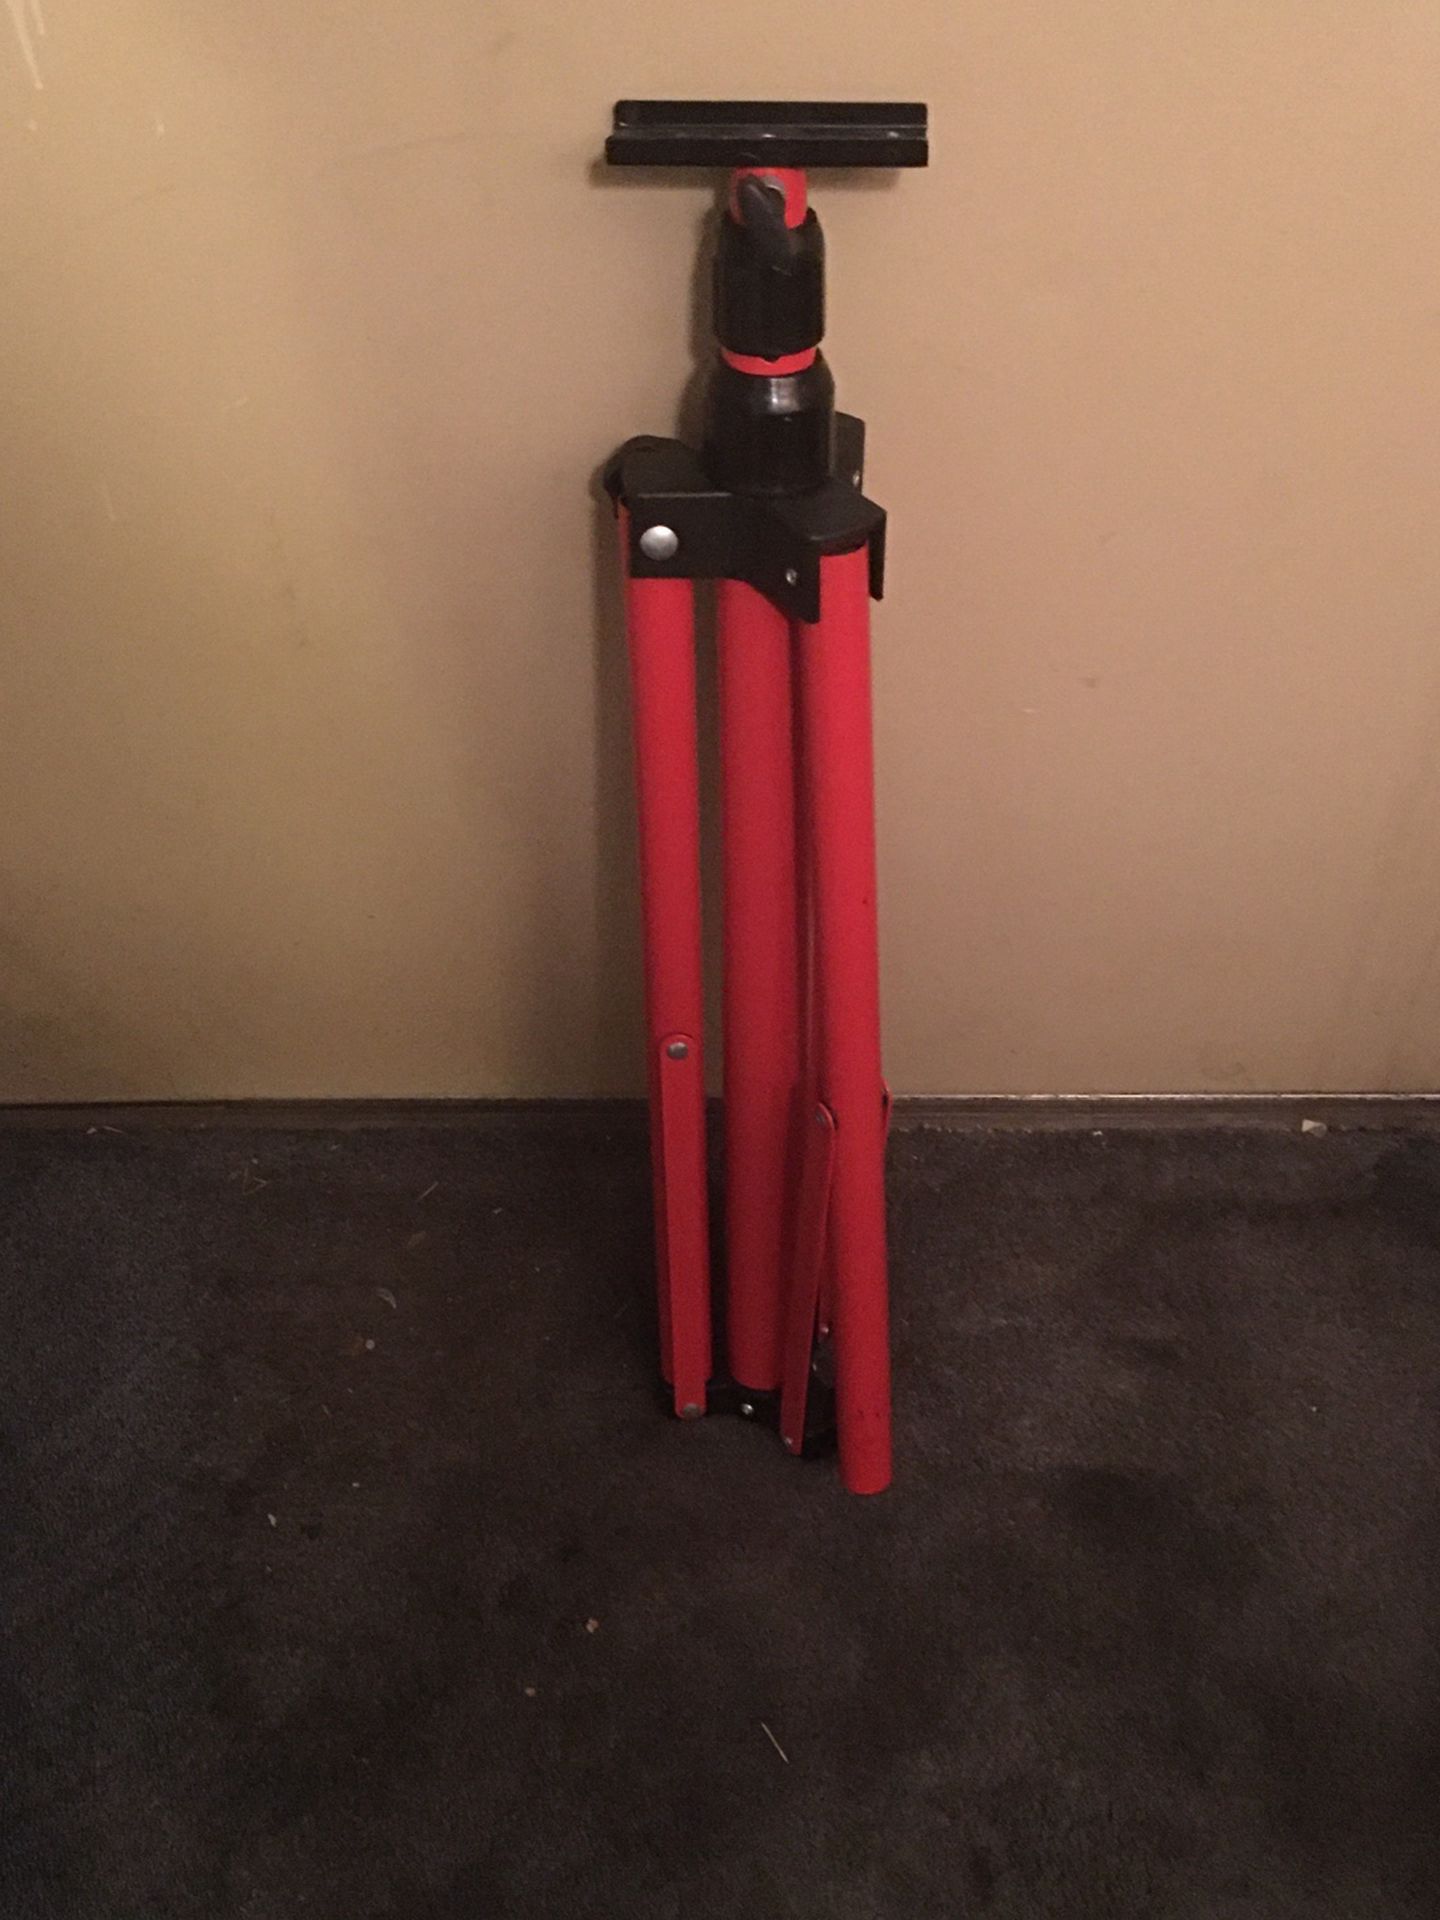 BRAND NEW NEVER USED 60” INCH ADJUSTABLE TRIPOD $20.00